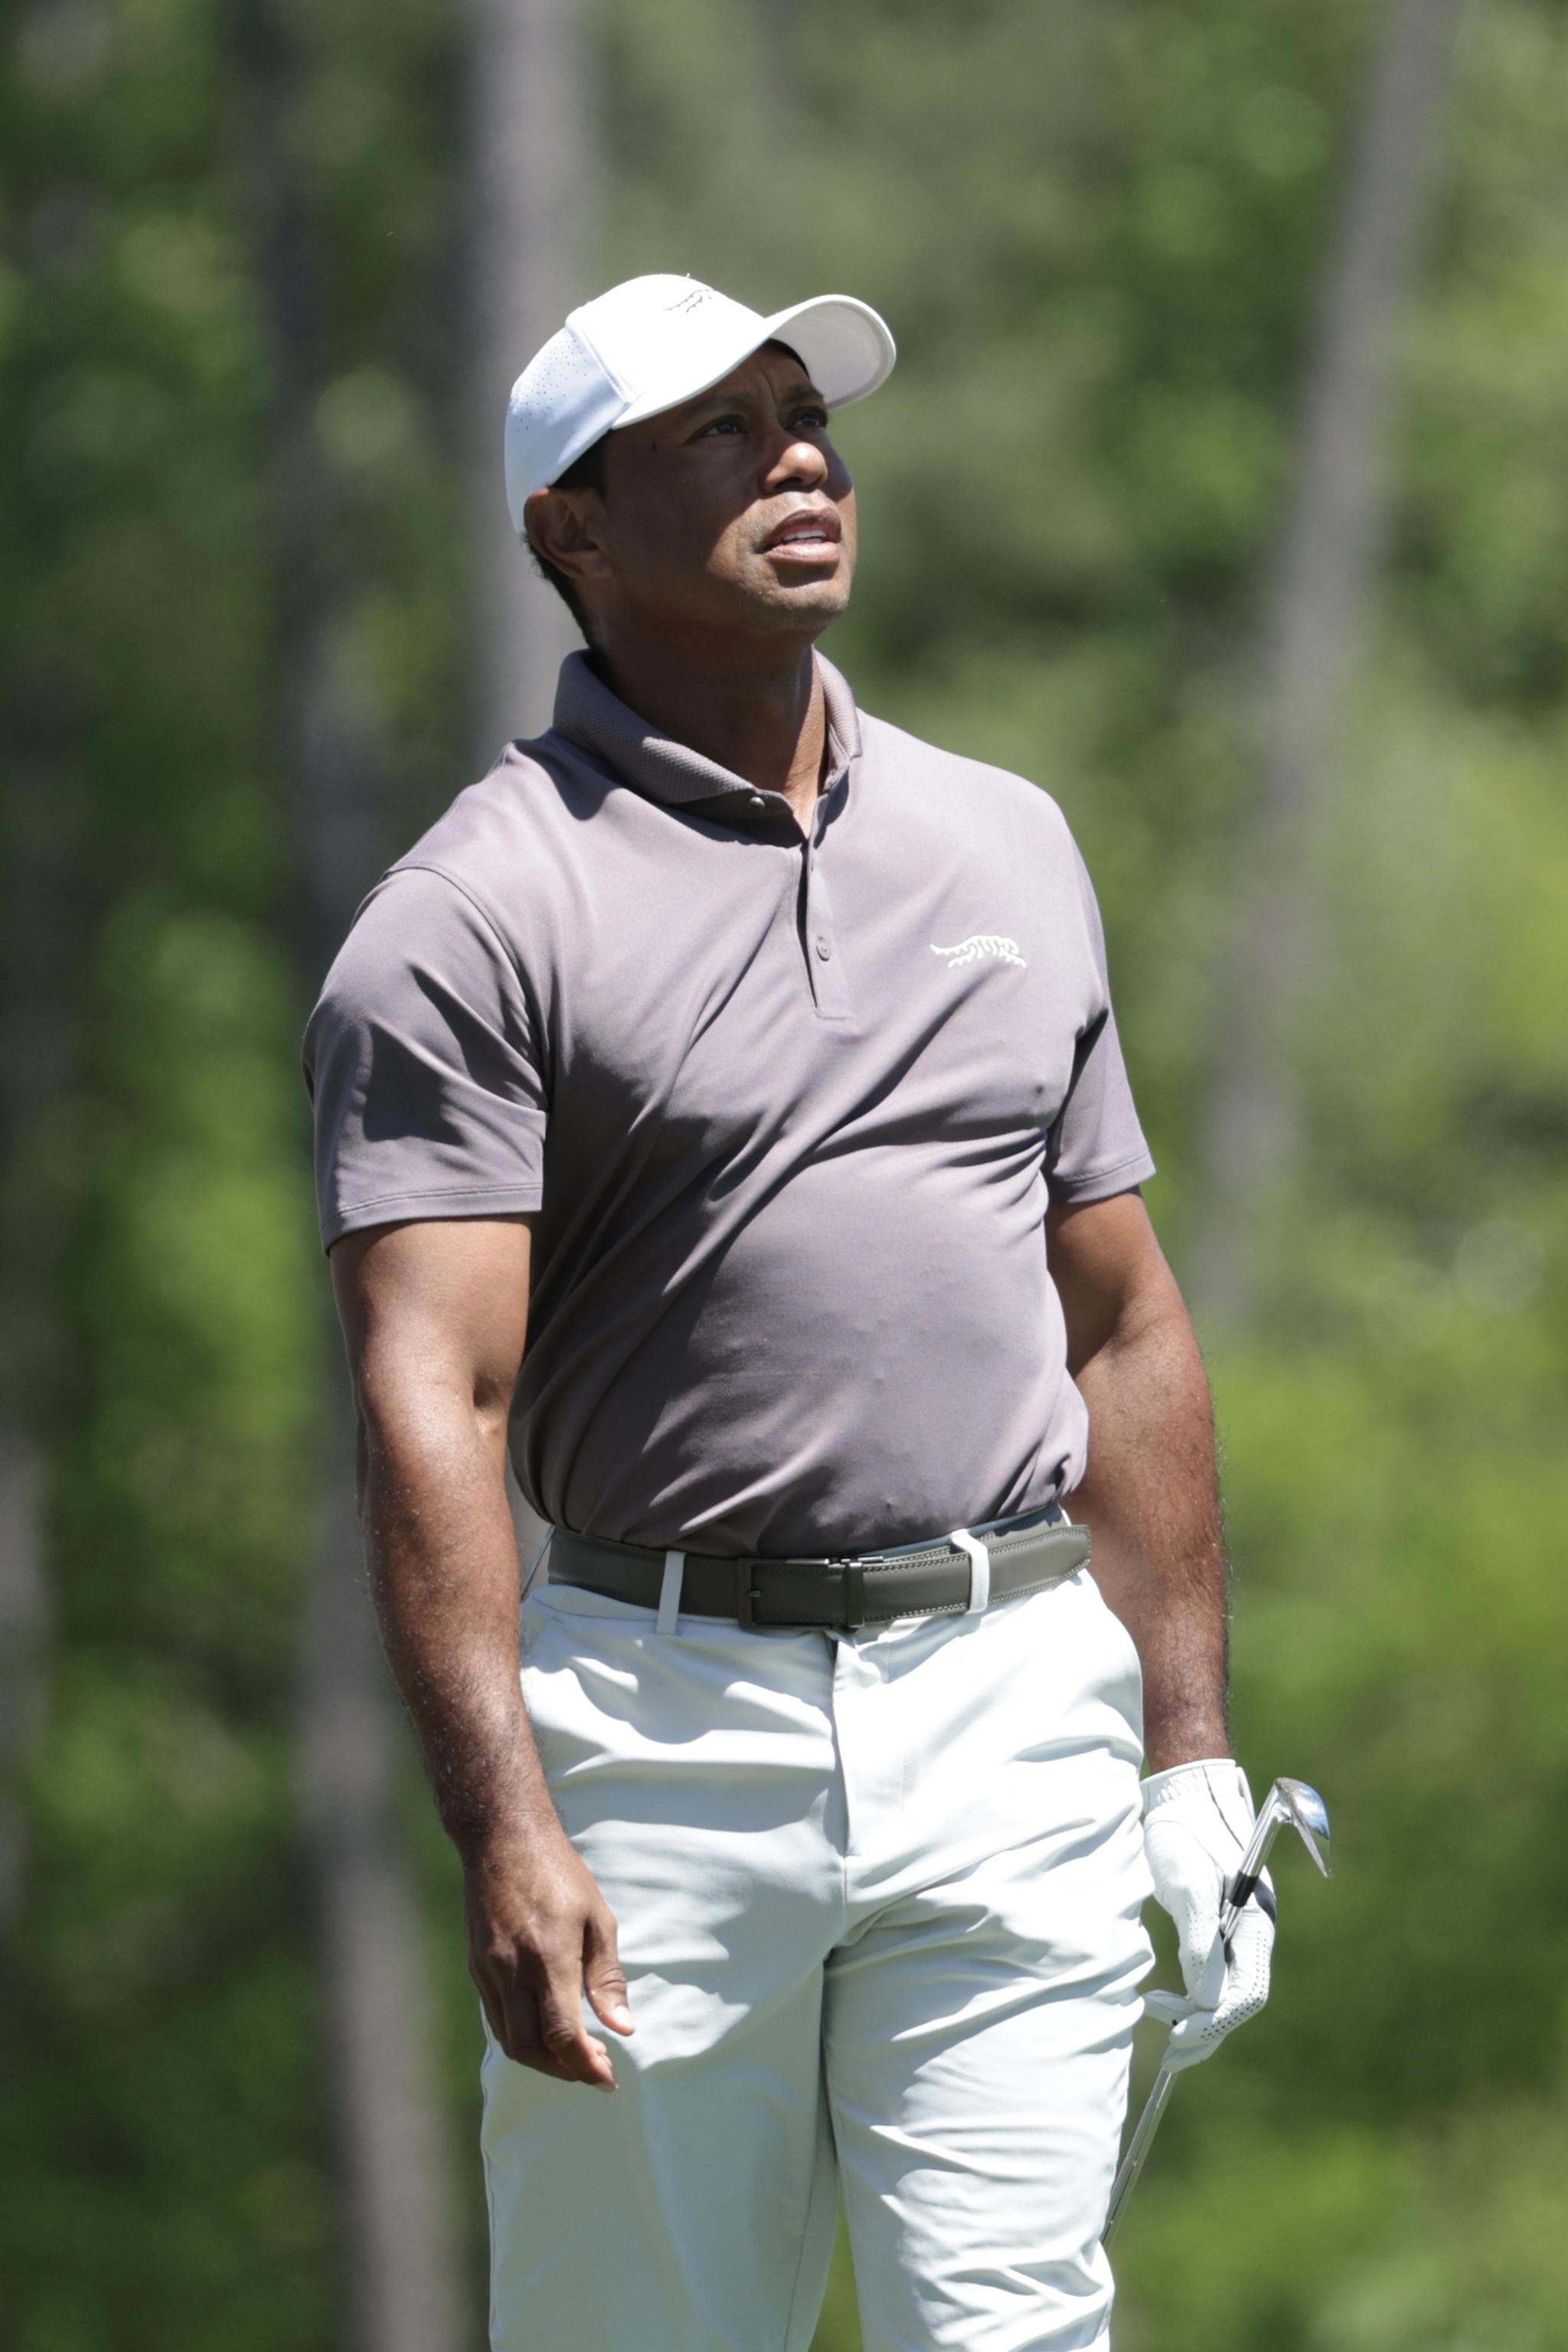 Tiger Woods tees off on the 12th hole during the second round of the Masters Tournament